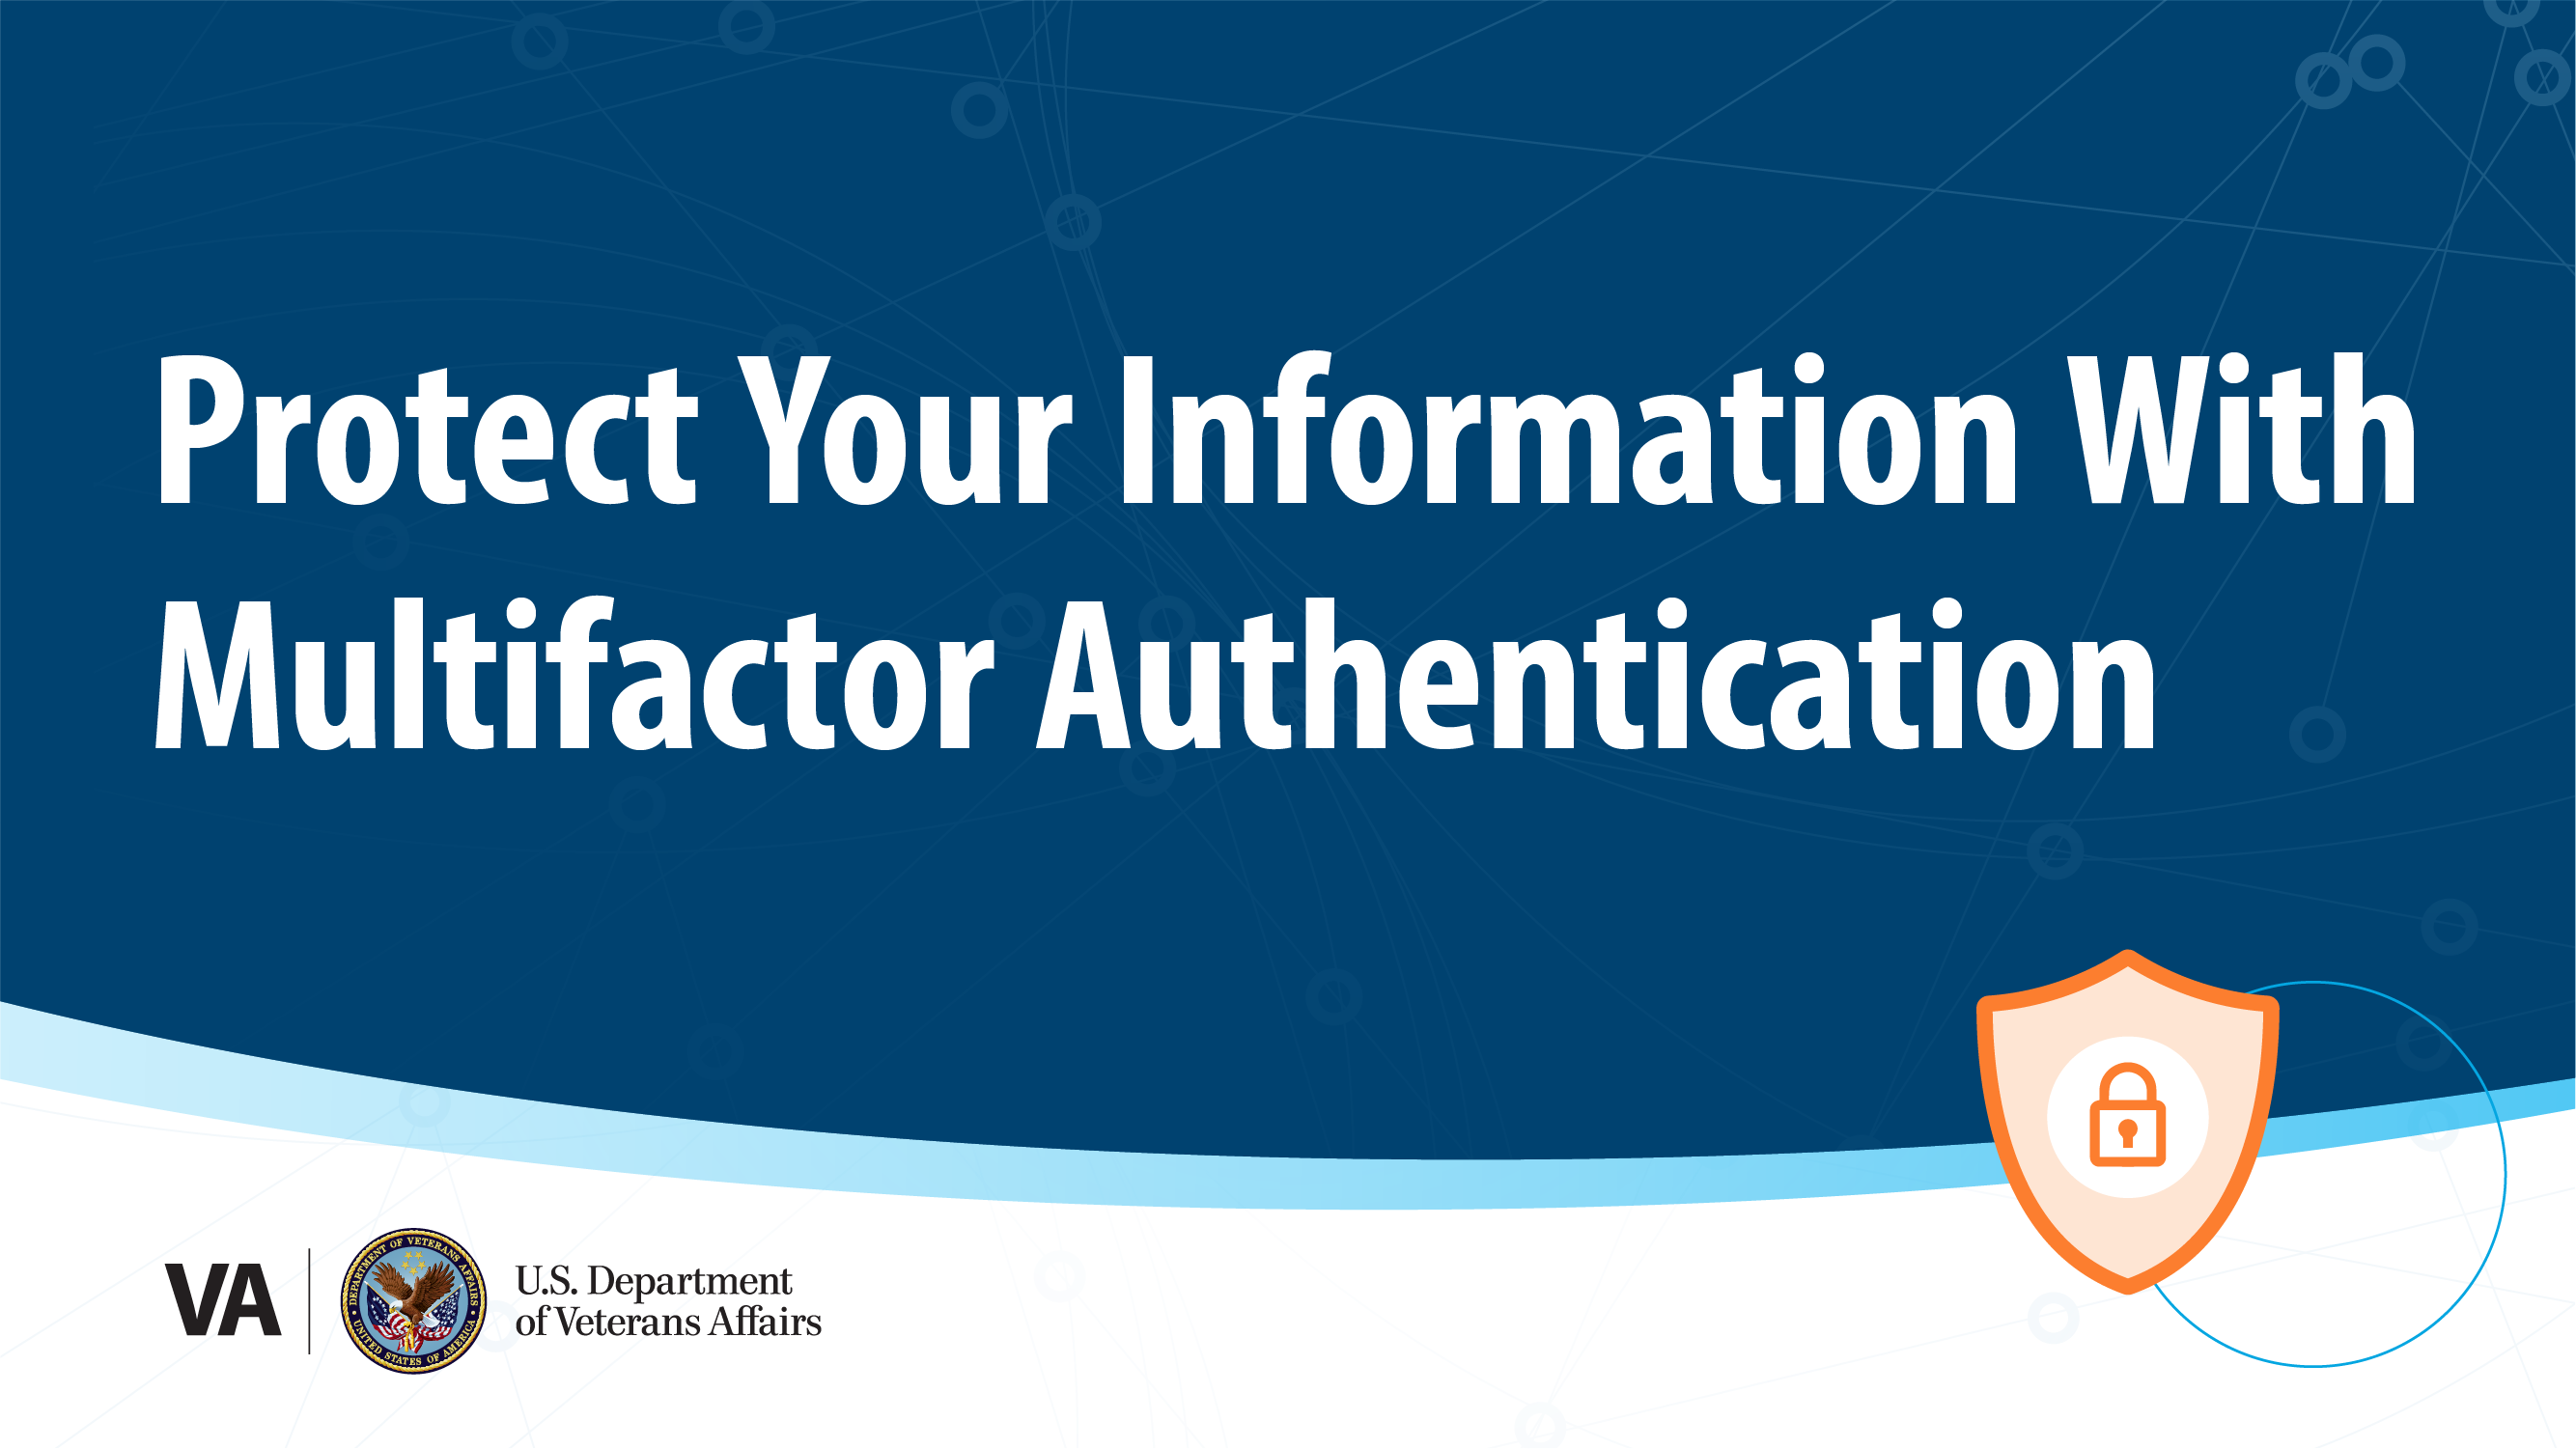 Dark blue background with the text "Protect Your Information With Multifactor Authentication" in white